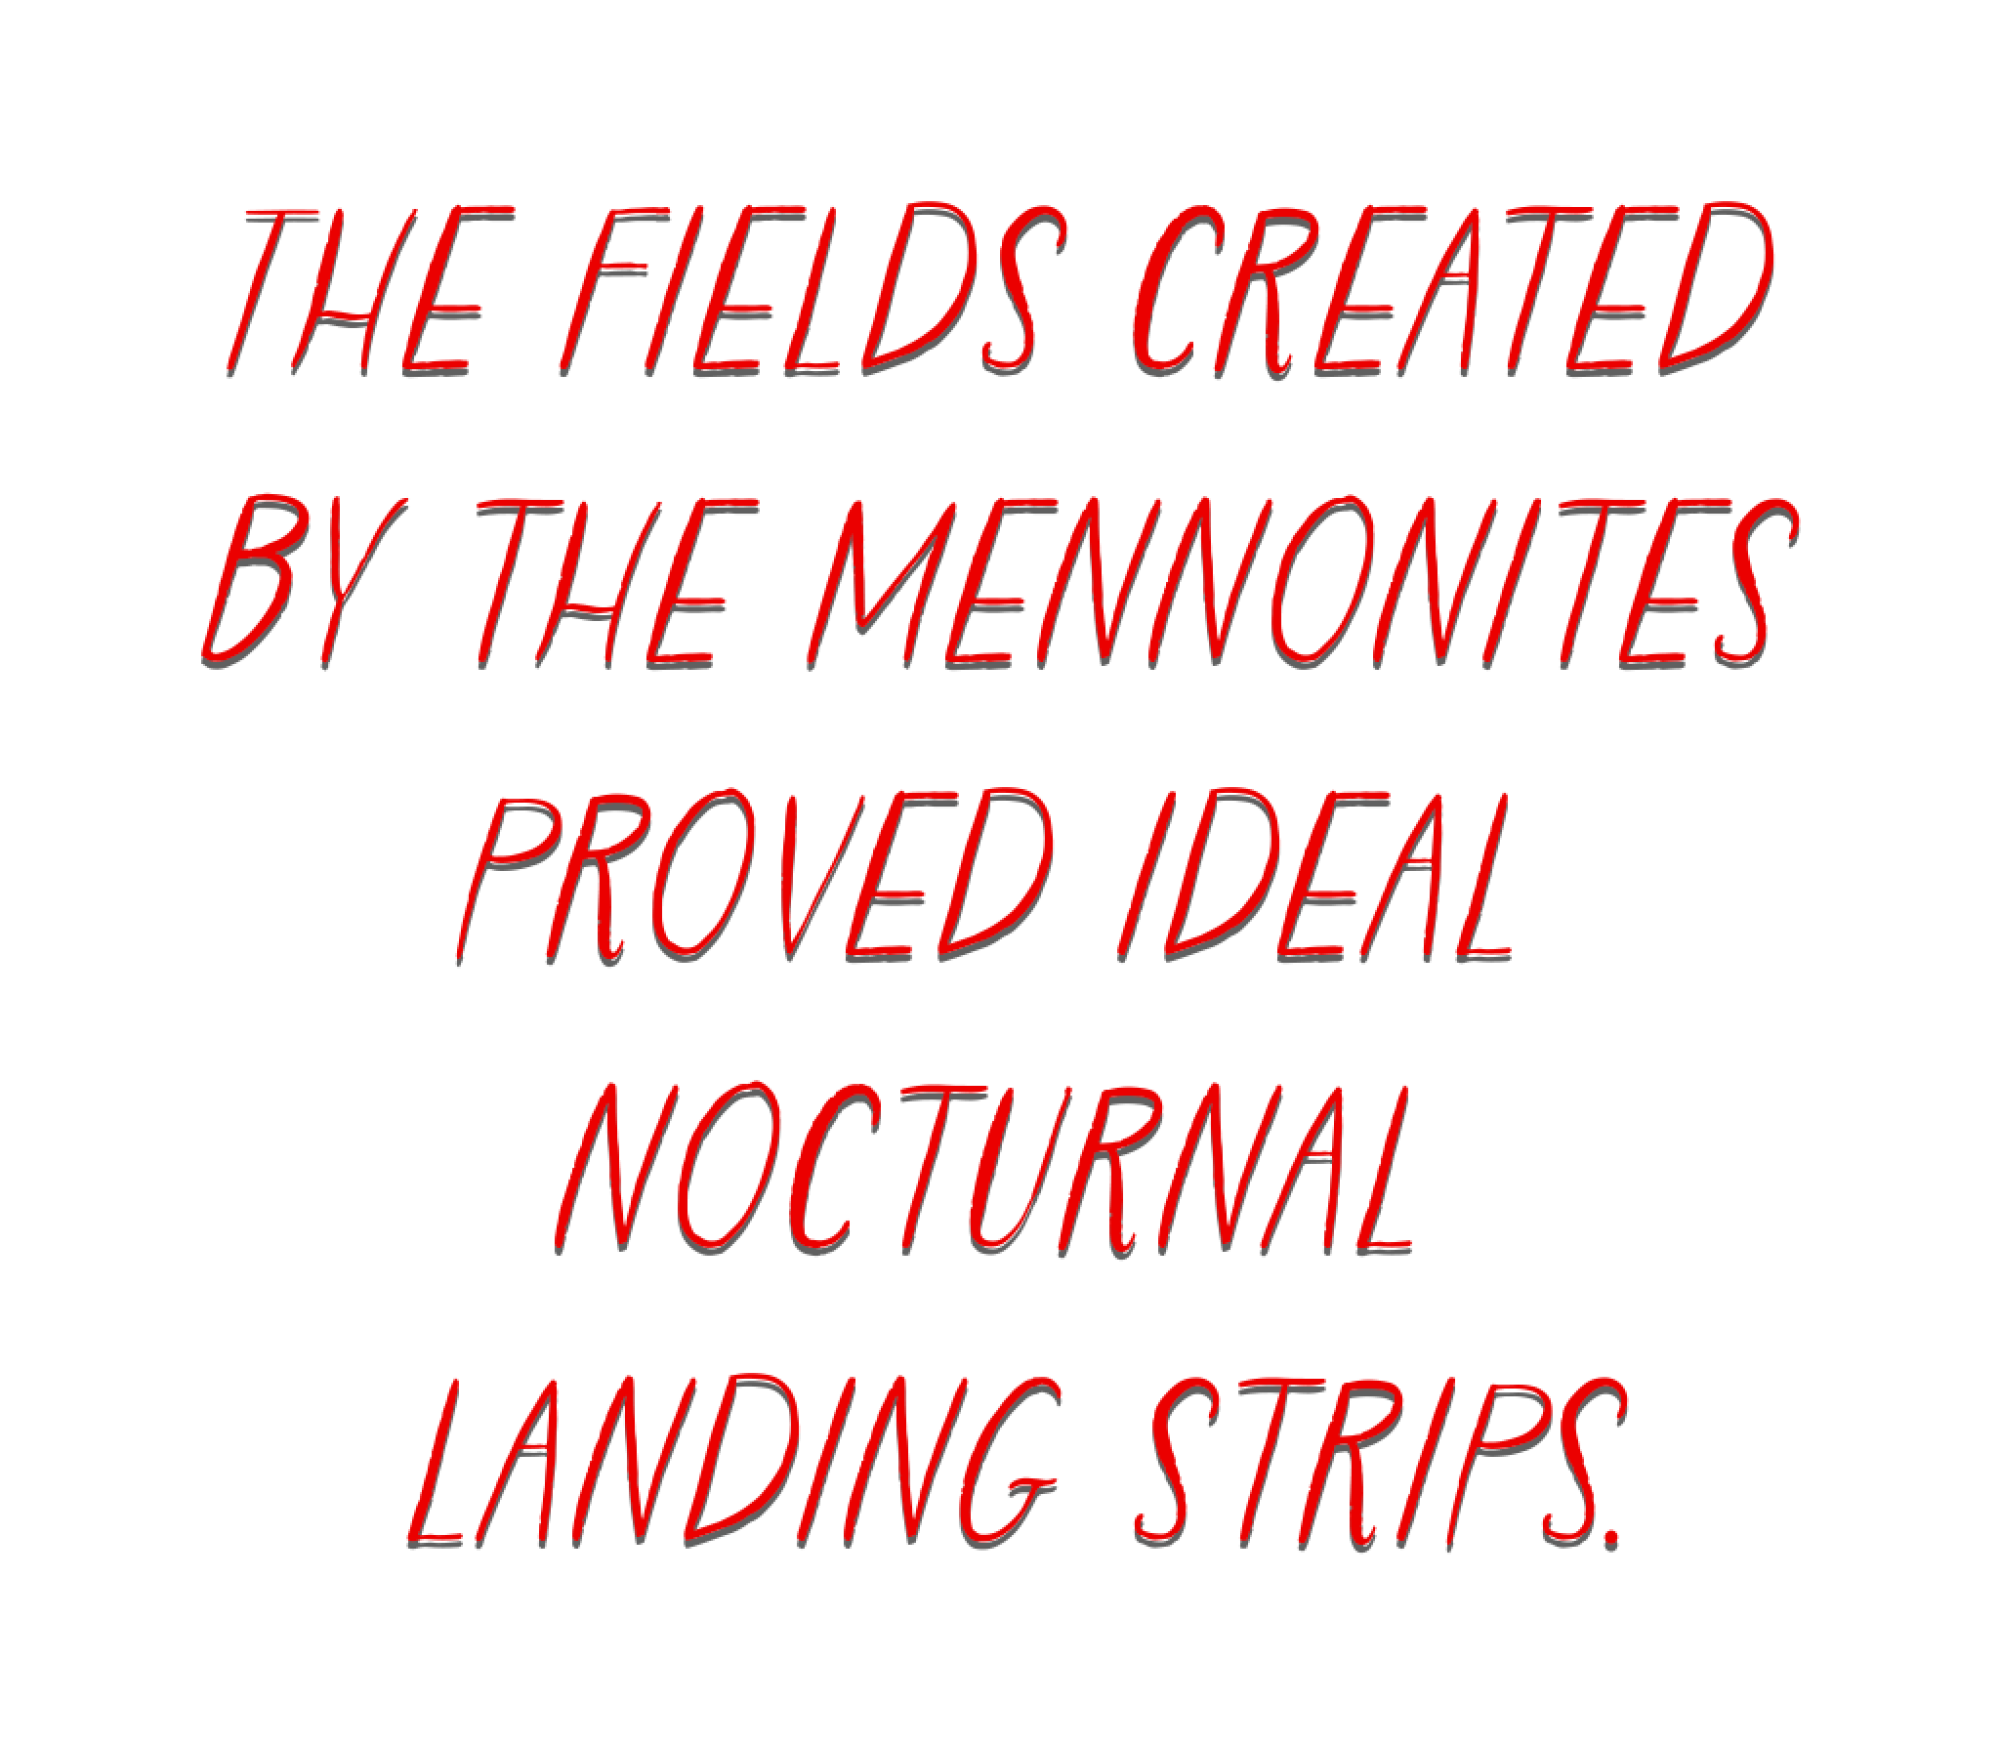 The fields created by the Mennonites proved ideal nocturnal landing strips.